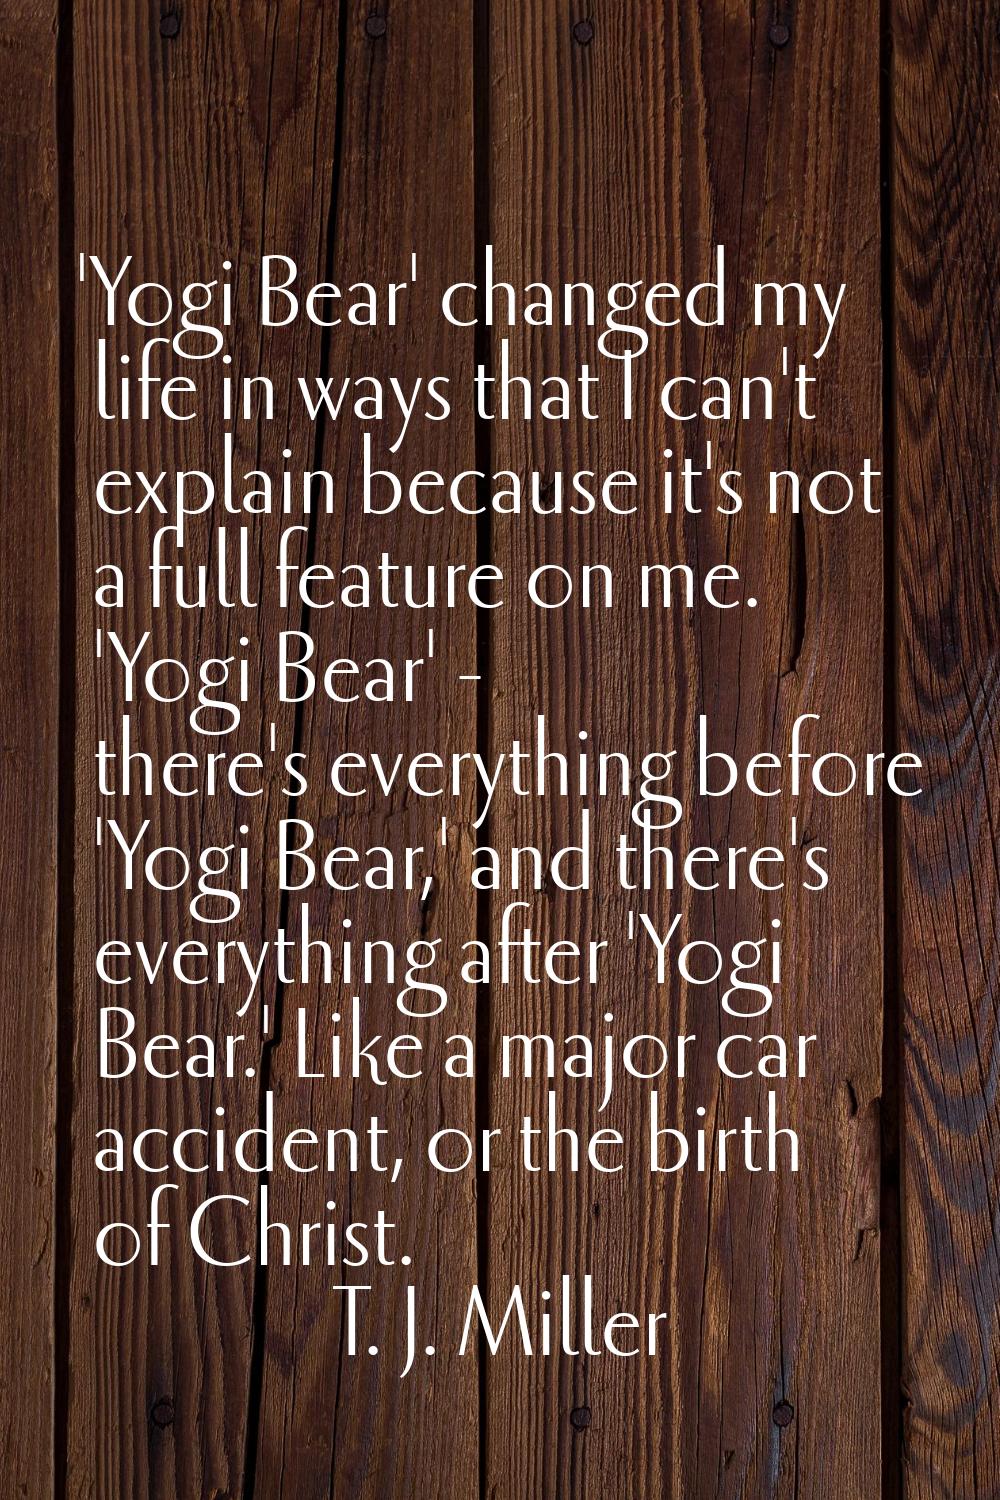 'Yogi Bear' changed my life in ways that I can't explain because it's not a full feature on me. 'Yo